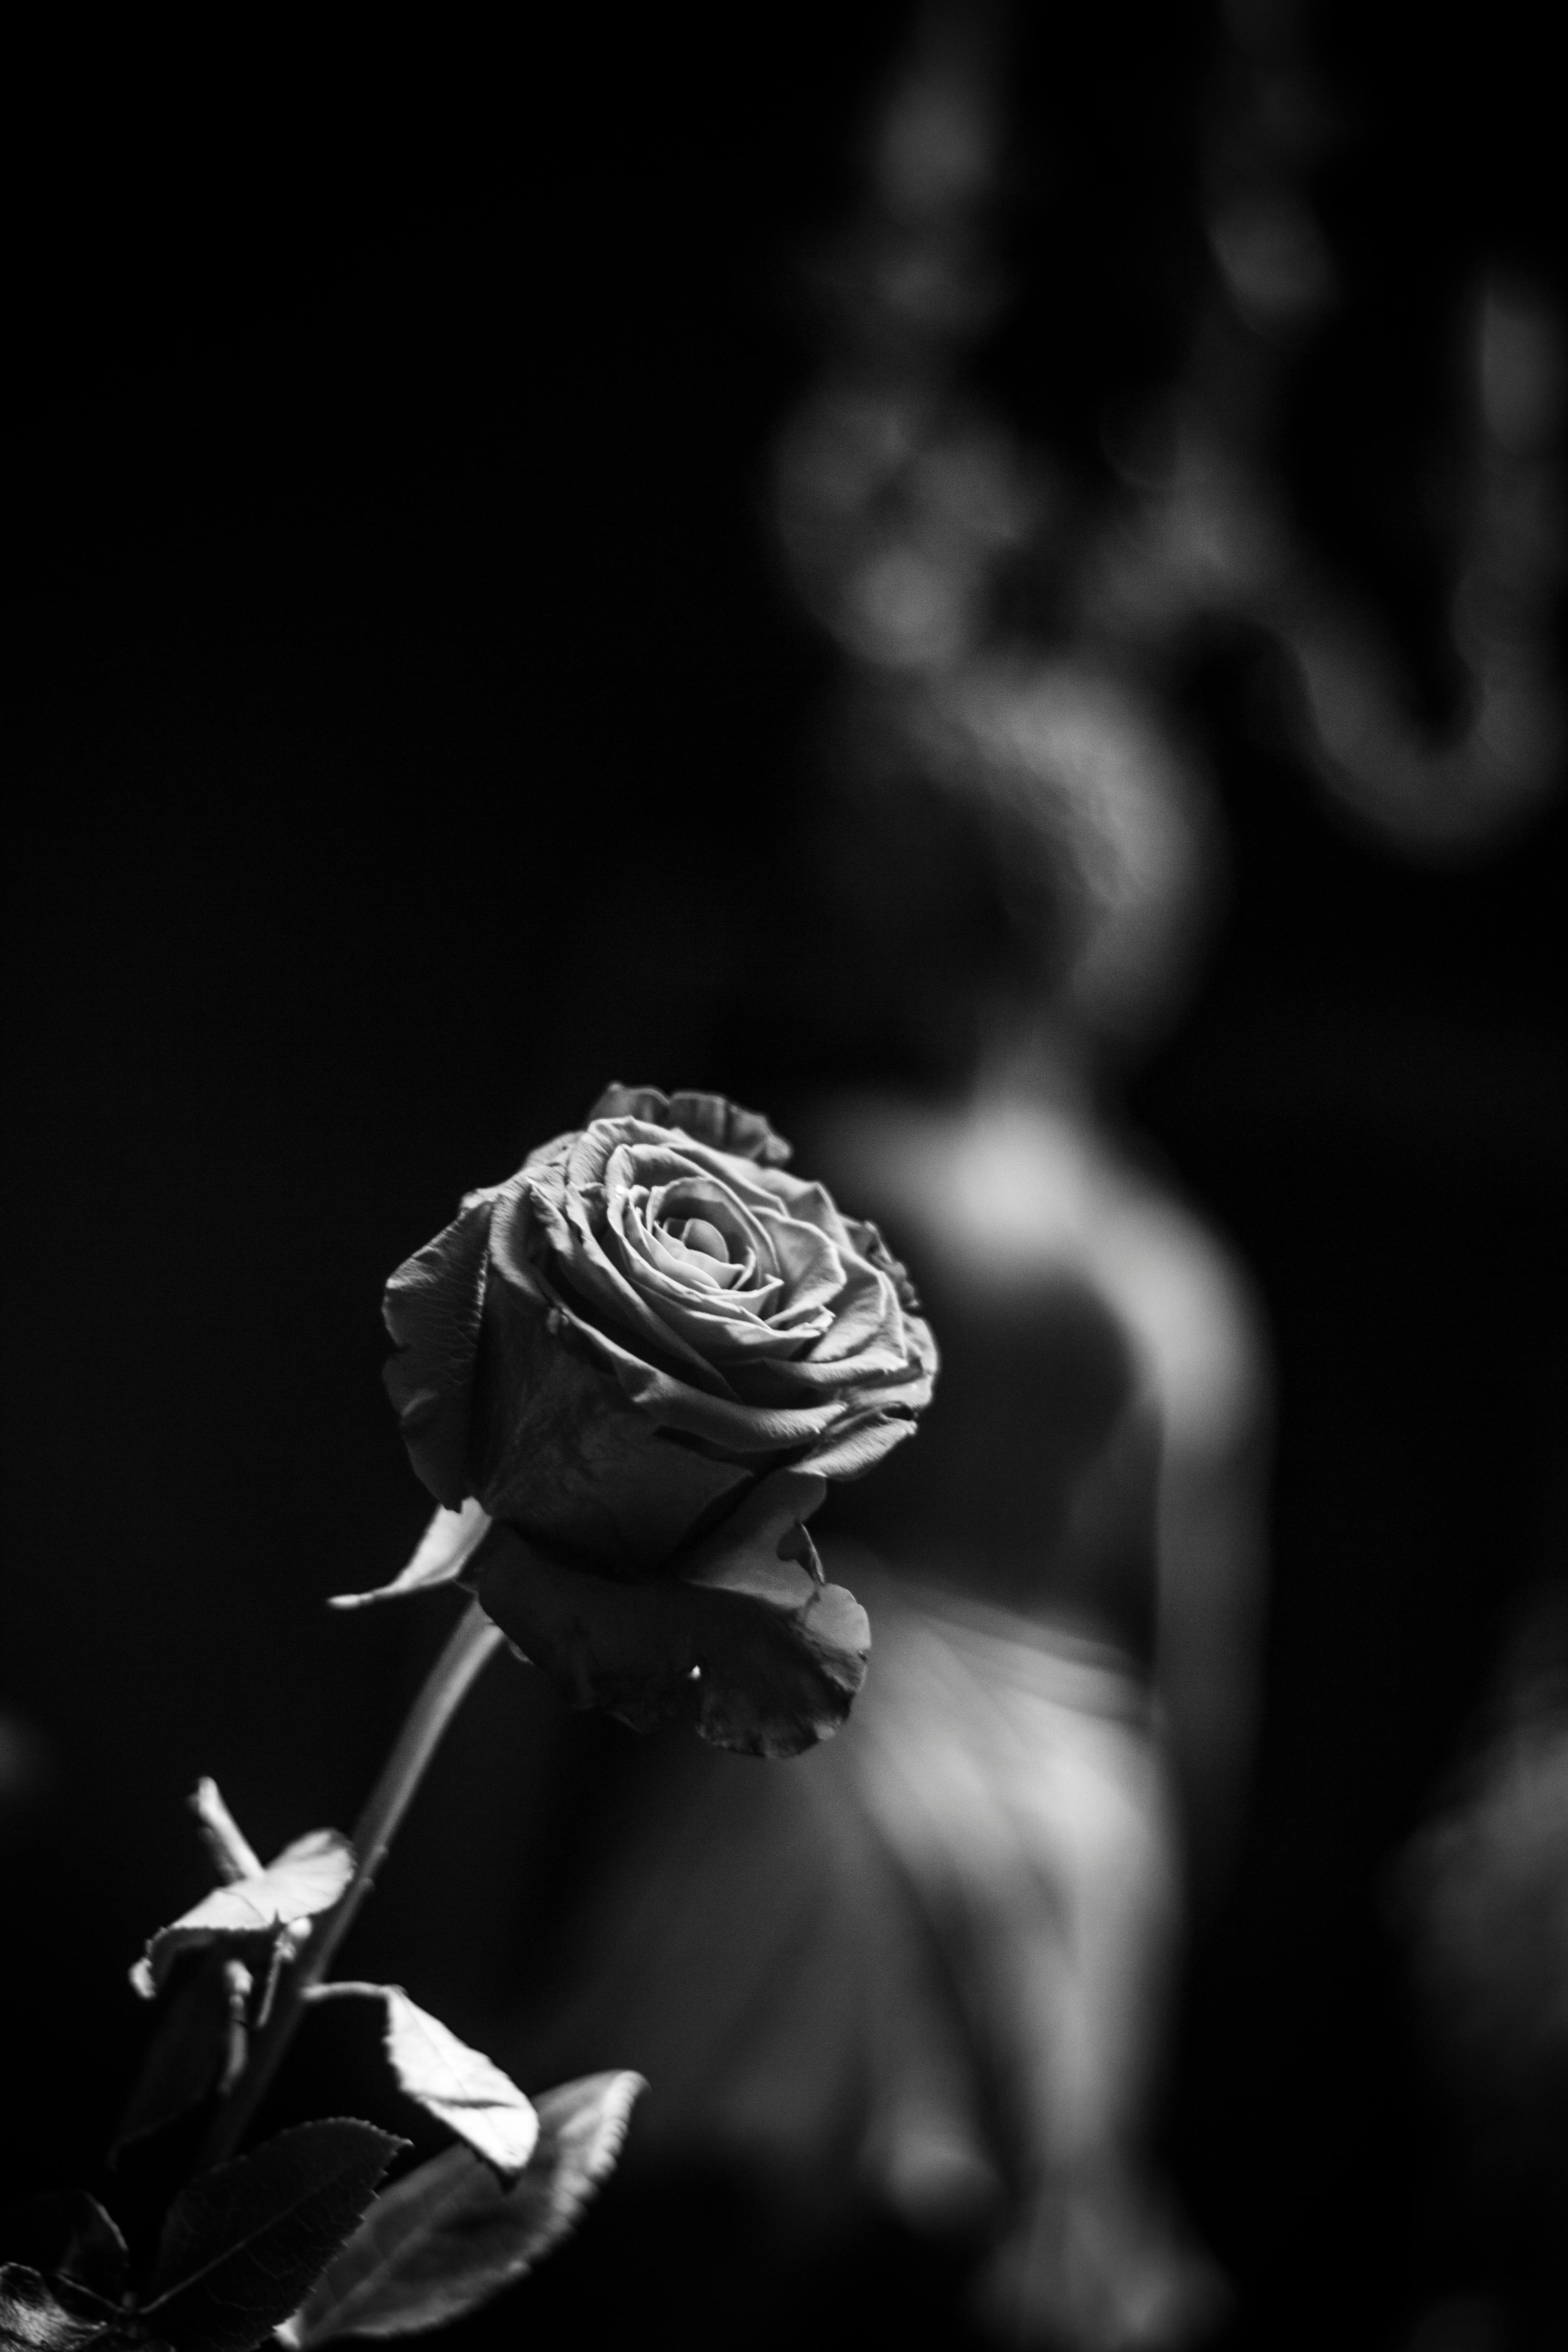 Free stock photo of beautiful flowers, black and white, rose